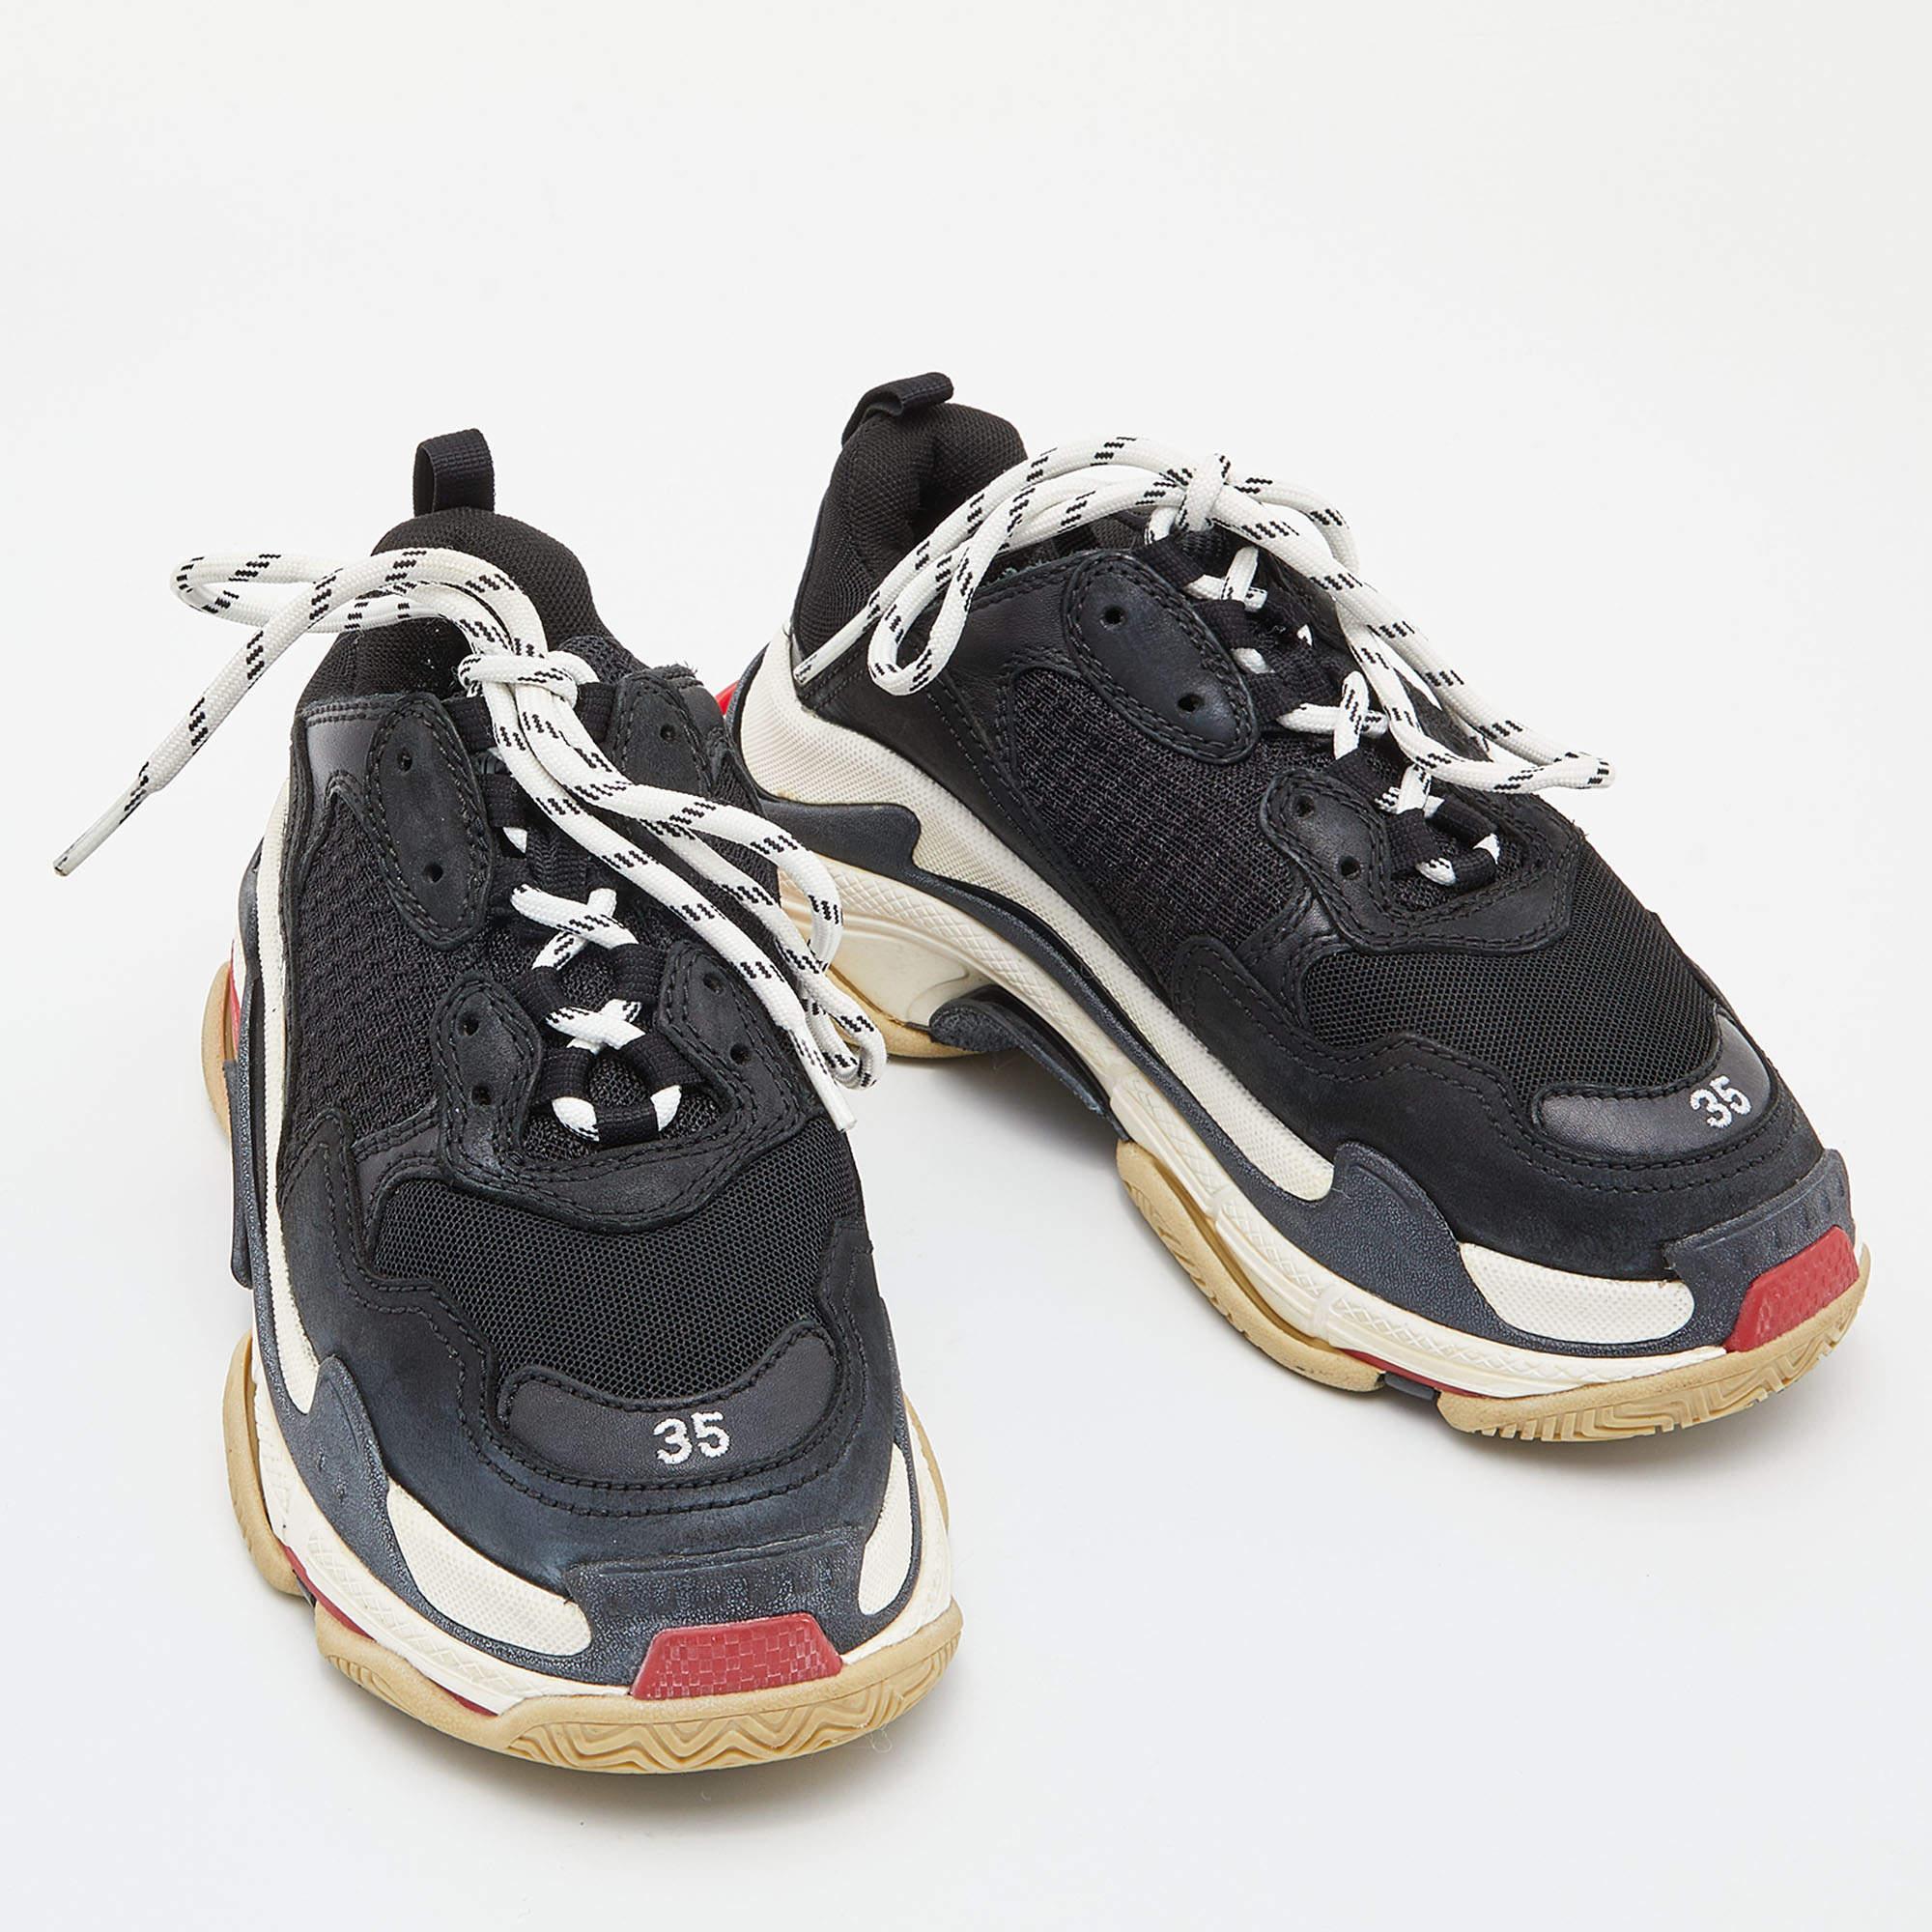 With durable construction, these Balenciaga sneakers will lend you a stylish modern look. The rubber soles of this pair will provide you with optimum grip while walking. Made from leather and mesh, these shoes get a luxe update with a brand